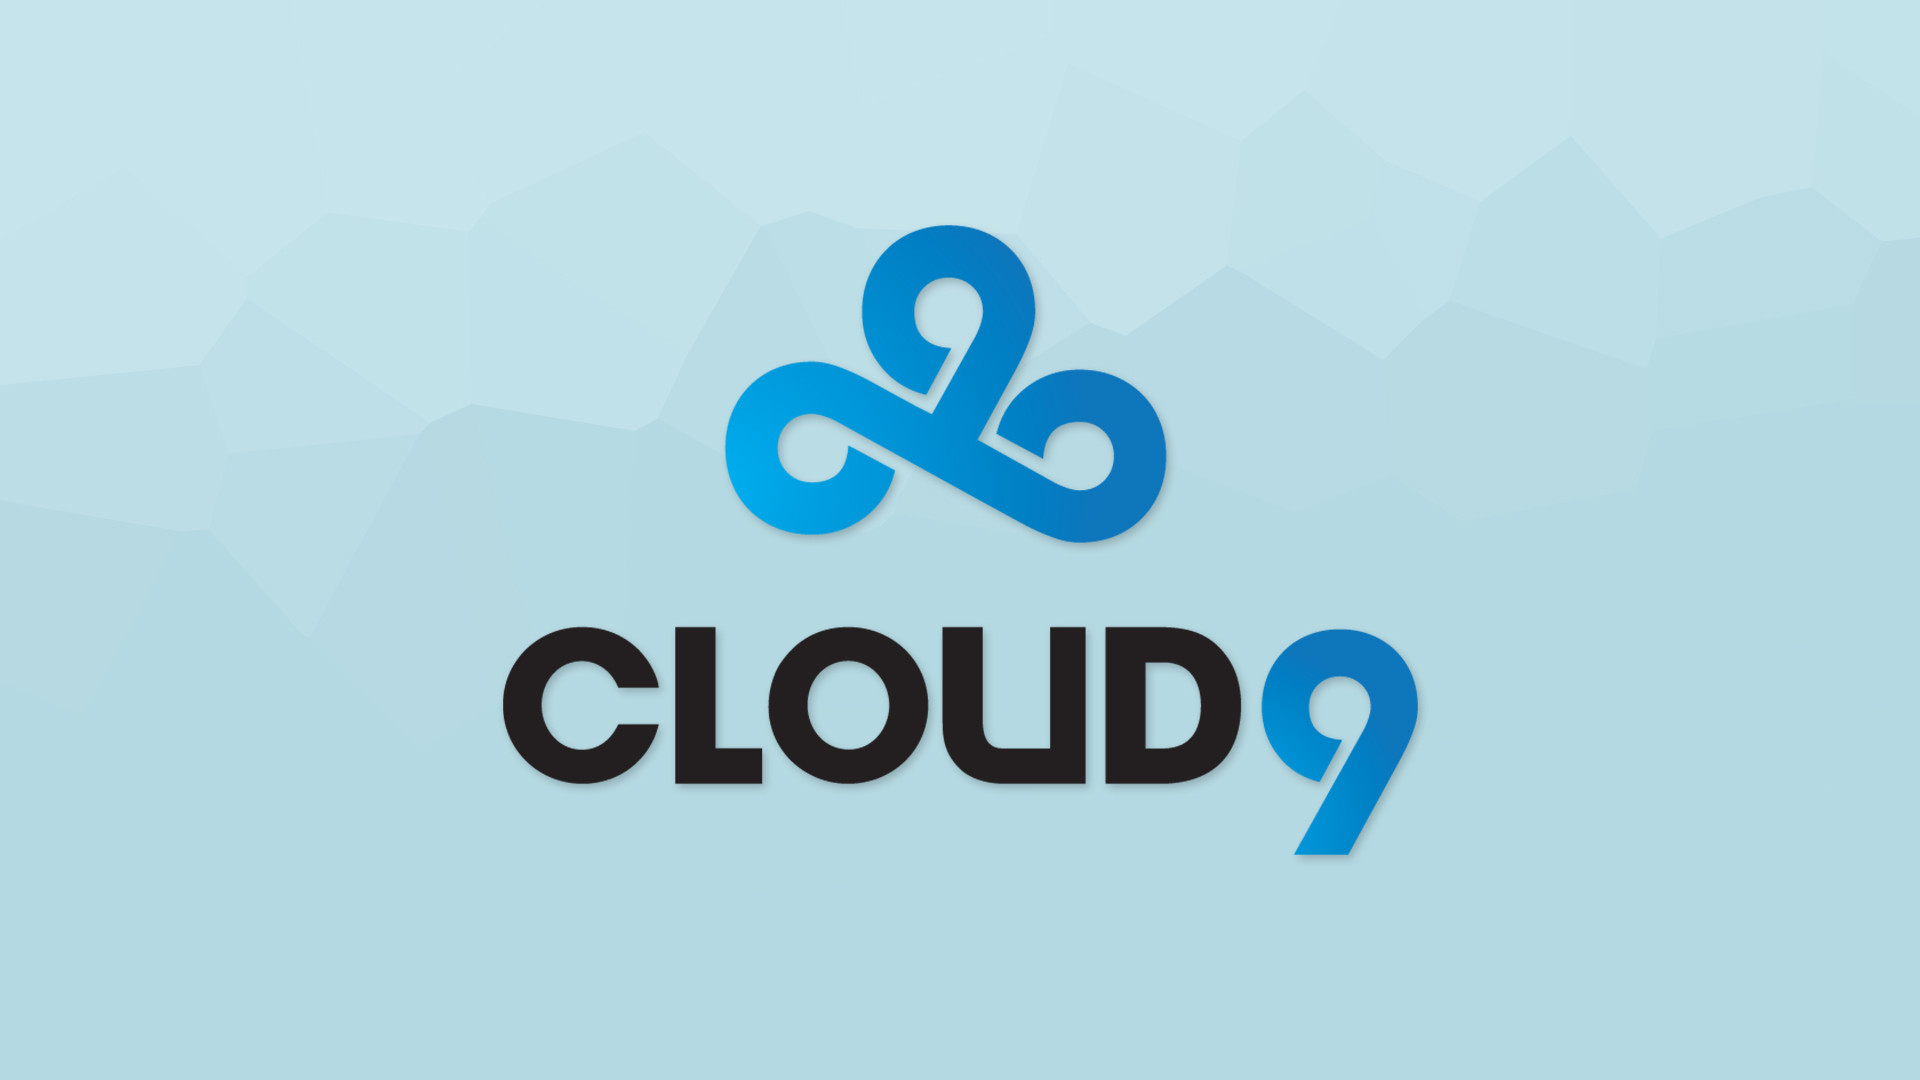 I made a basic Cloud 9 Wallpaper for myself, figured someone else might want to use it too